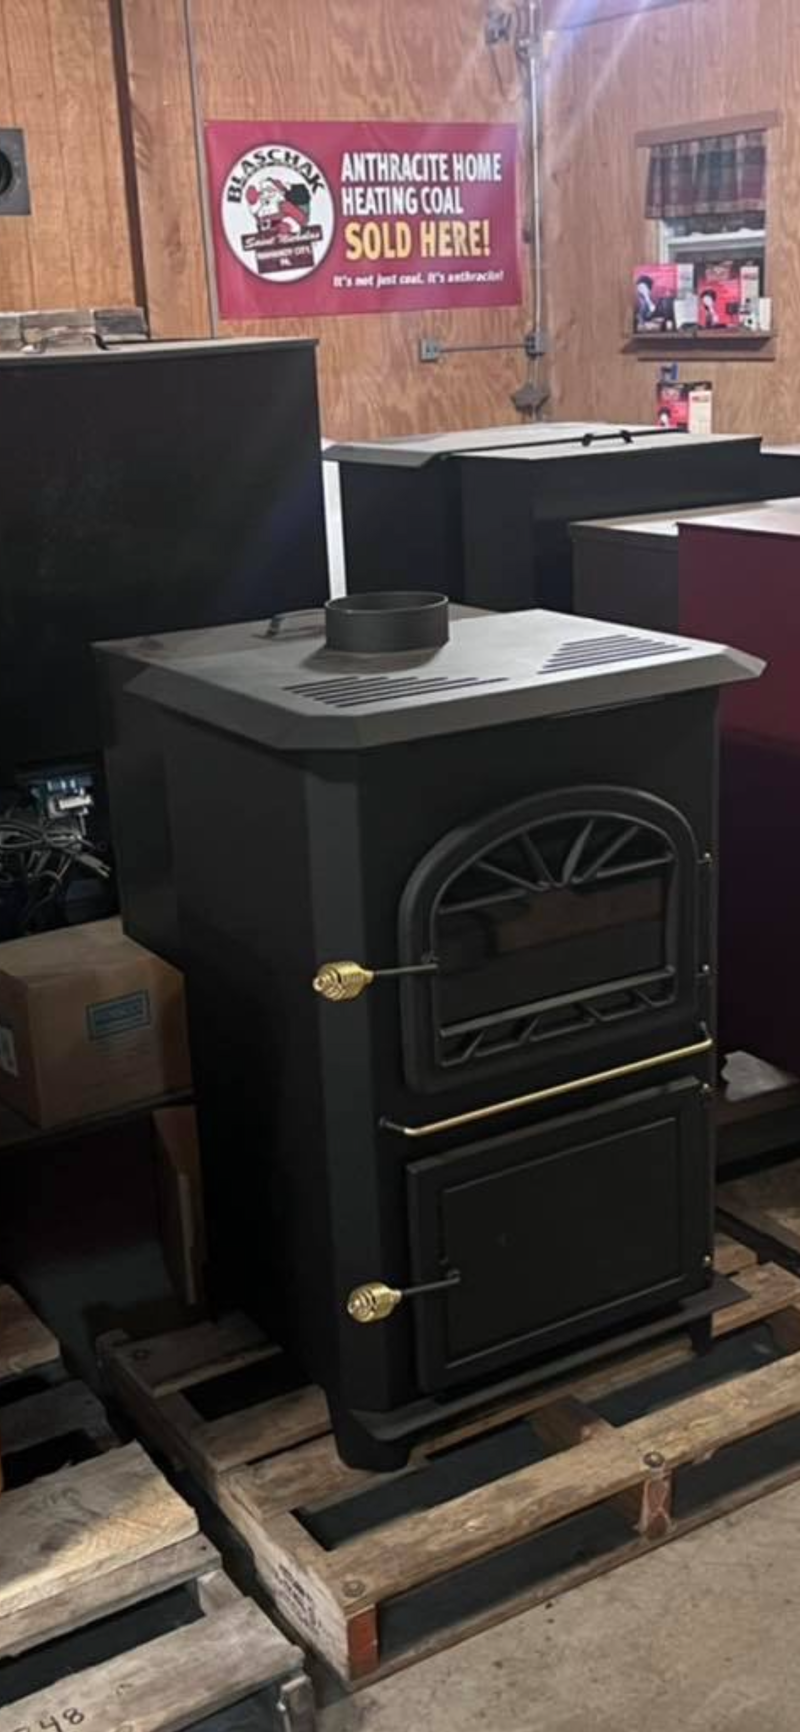 Load image into Gallery viewer, Leisure Line Pioneer Stove-- Top Vent
